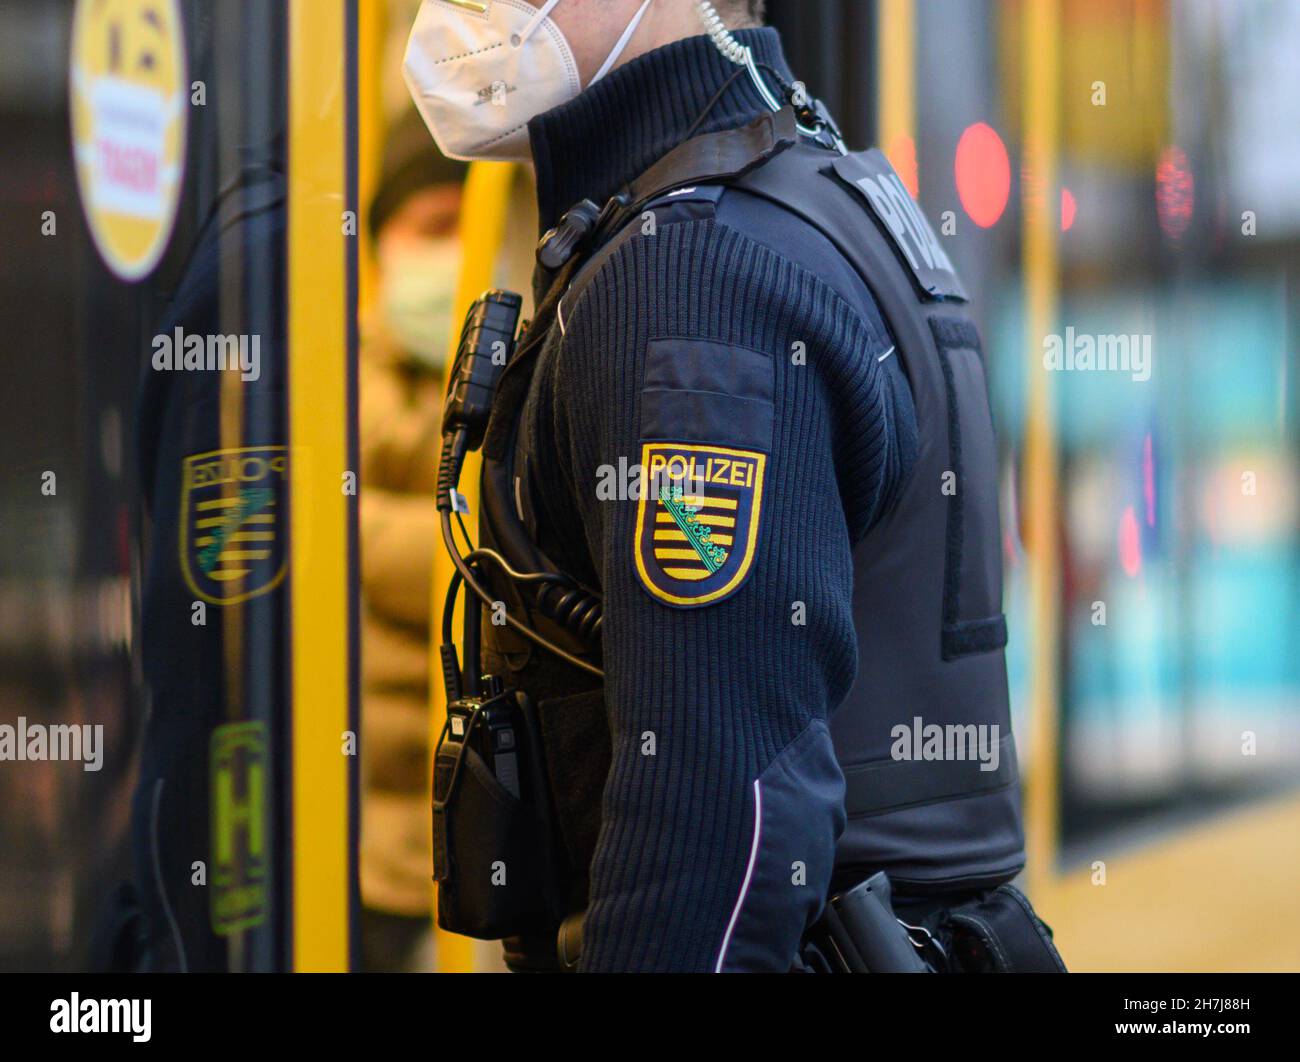 Dresden, Germany. 23rd Nov, 2021. A police officer boards a DVB tram in Dresden city centre. The Dresden police department is monitoring compliance with the new Corona rules on a daily basis with 50 officers. Accordingly, the focus is on controls of the FFP2 mask obligation in public transport as well as the exit restrictions for unvaccinated persons in hotspot areas. Credit: Robert Michael/dpa-Zentralbild/dpa/Alamy Live News Stock Photo